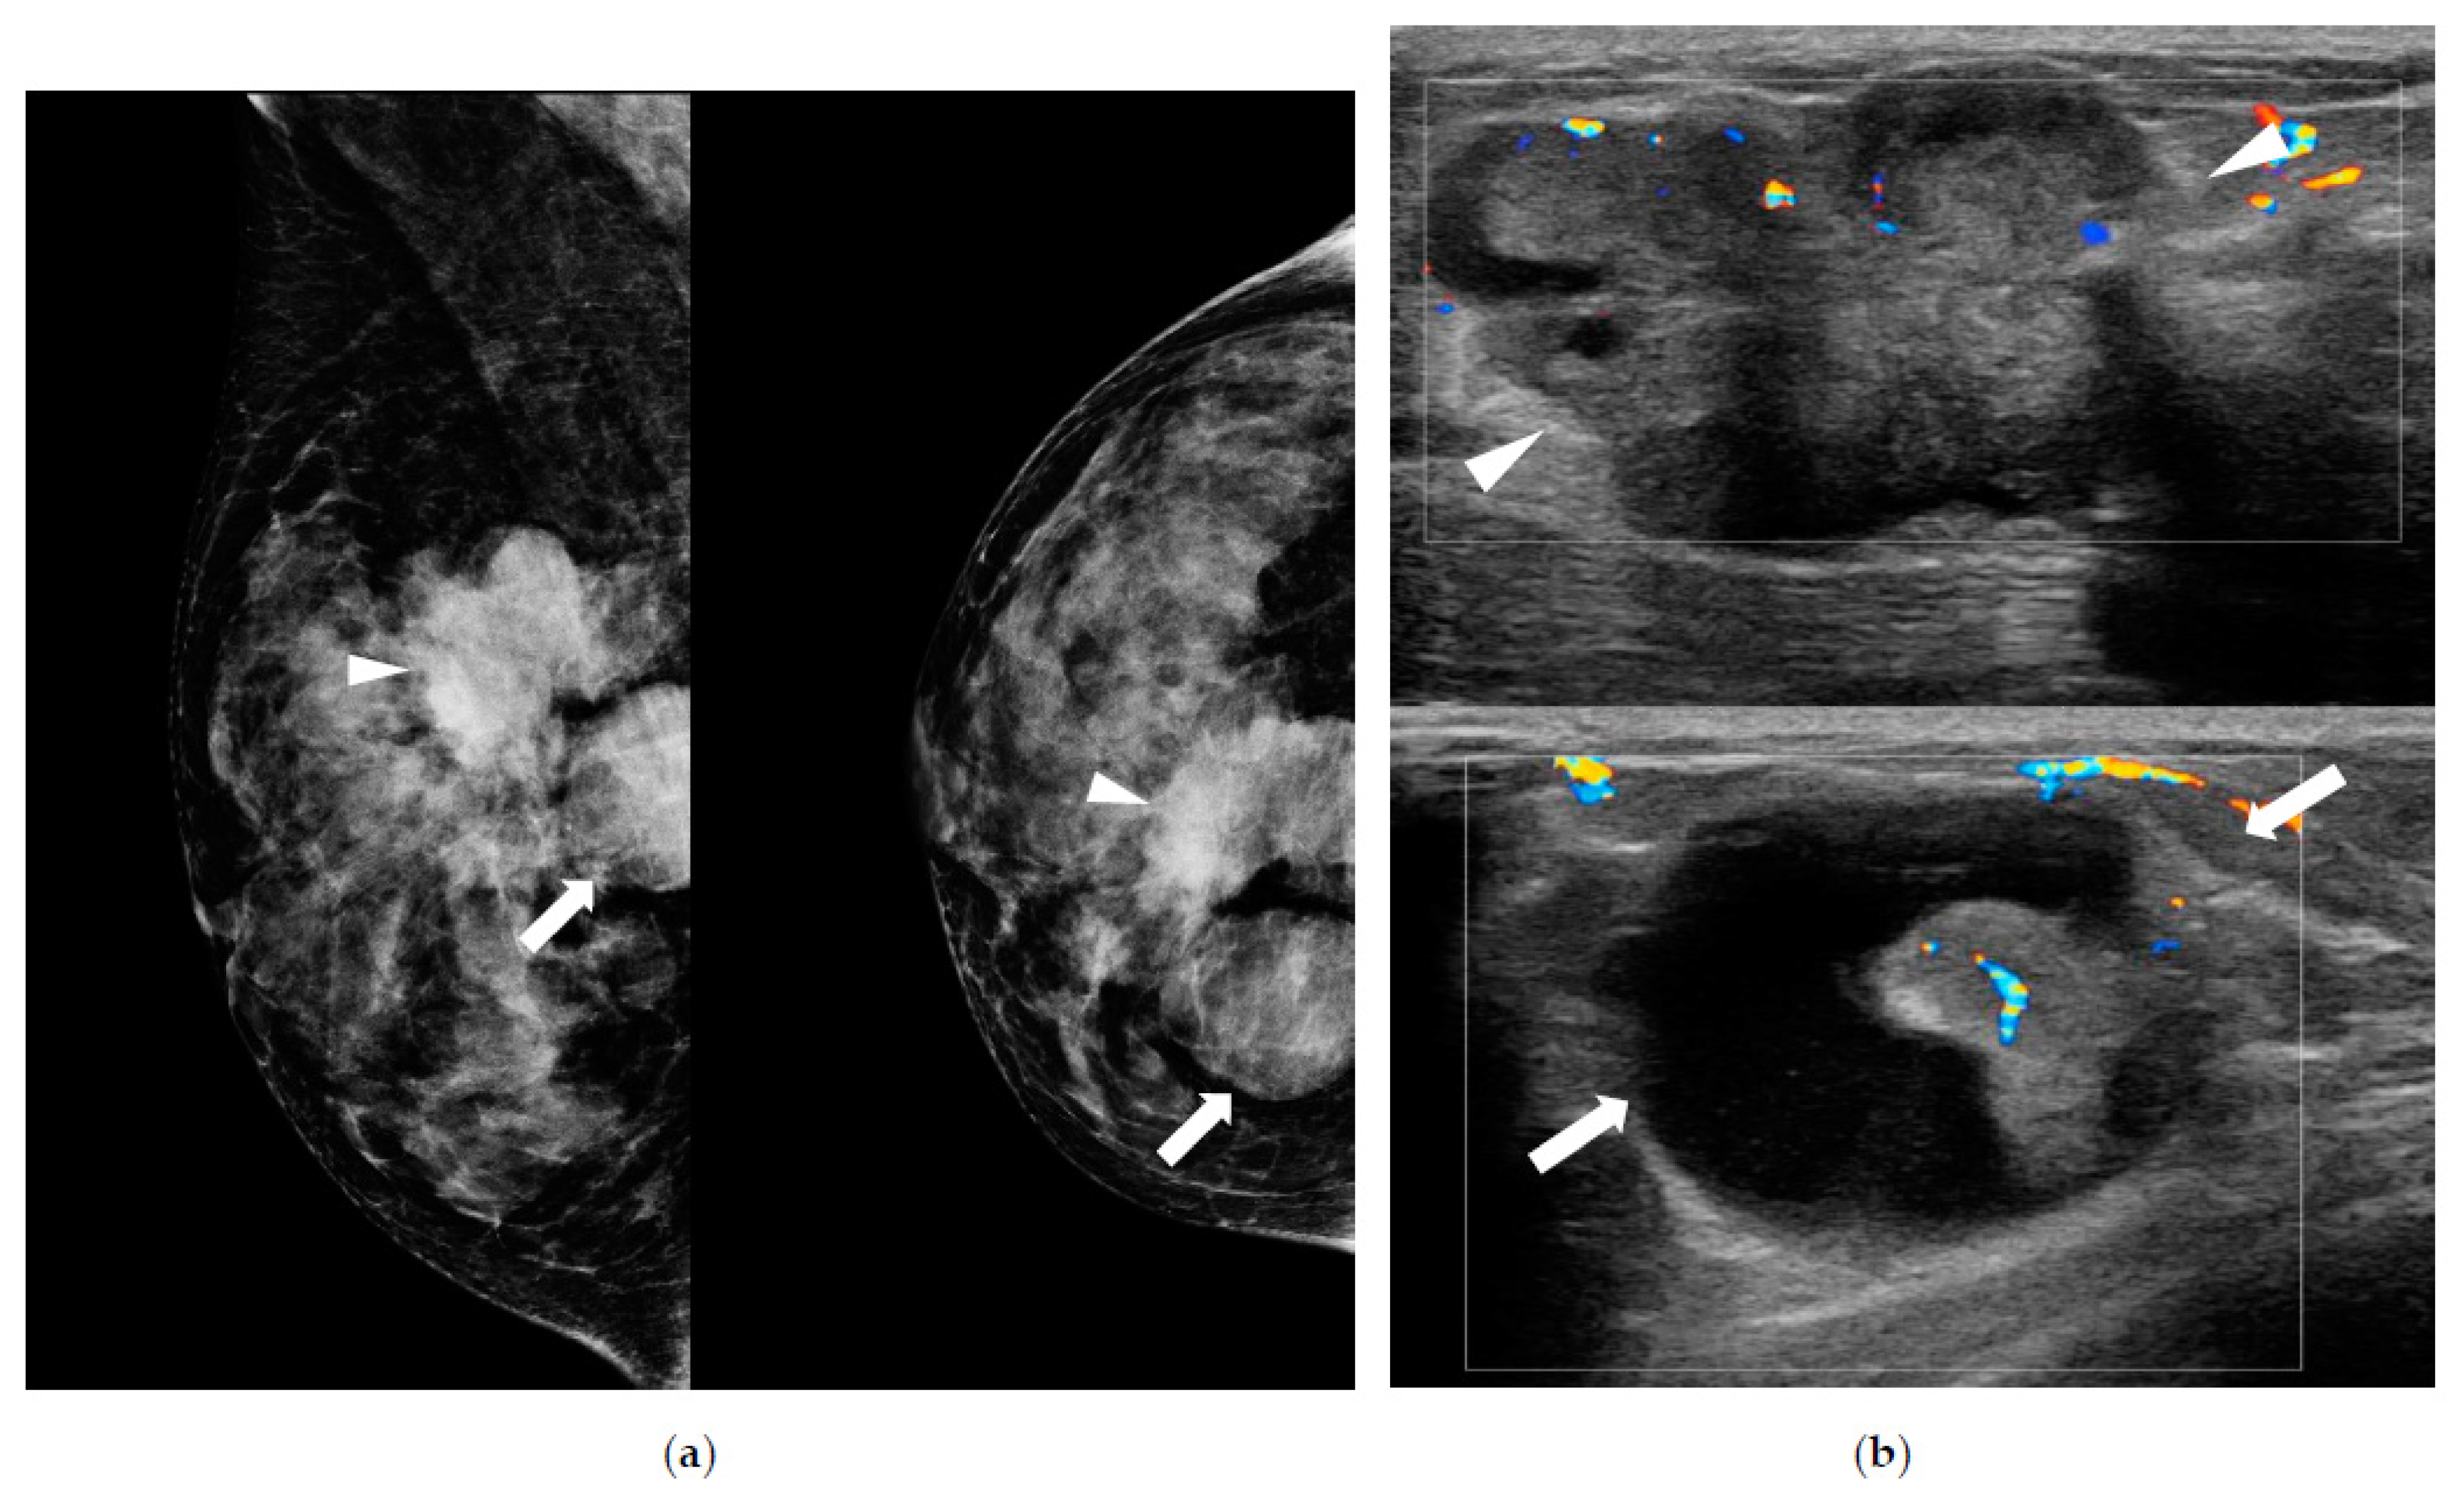 Breast ultrasonography revealed a 36-mm irregular mass at the 9 o